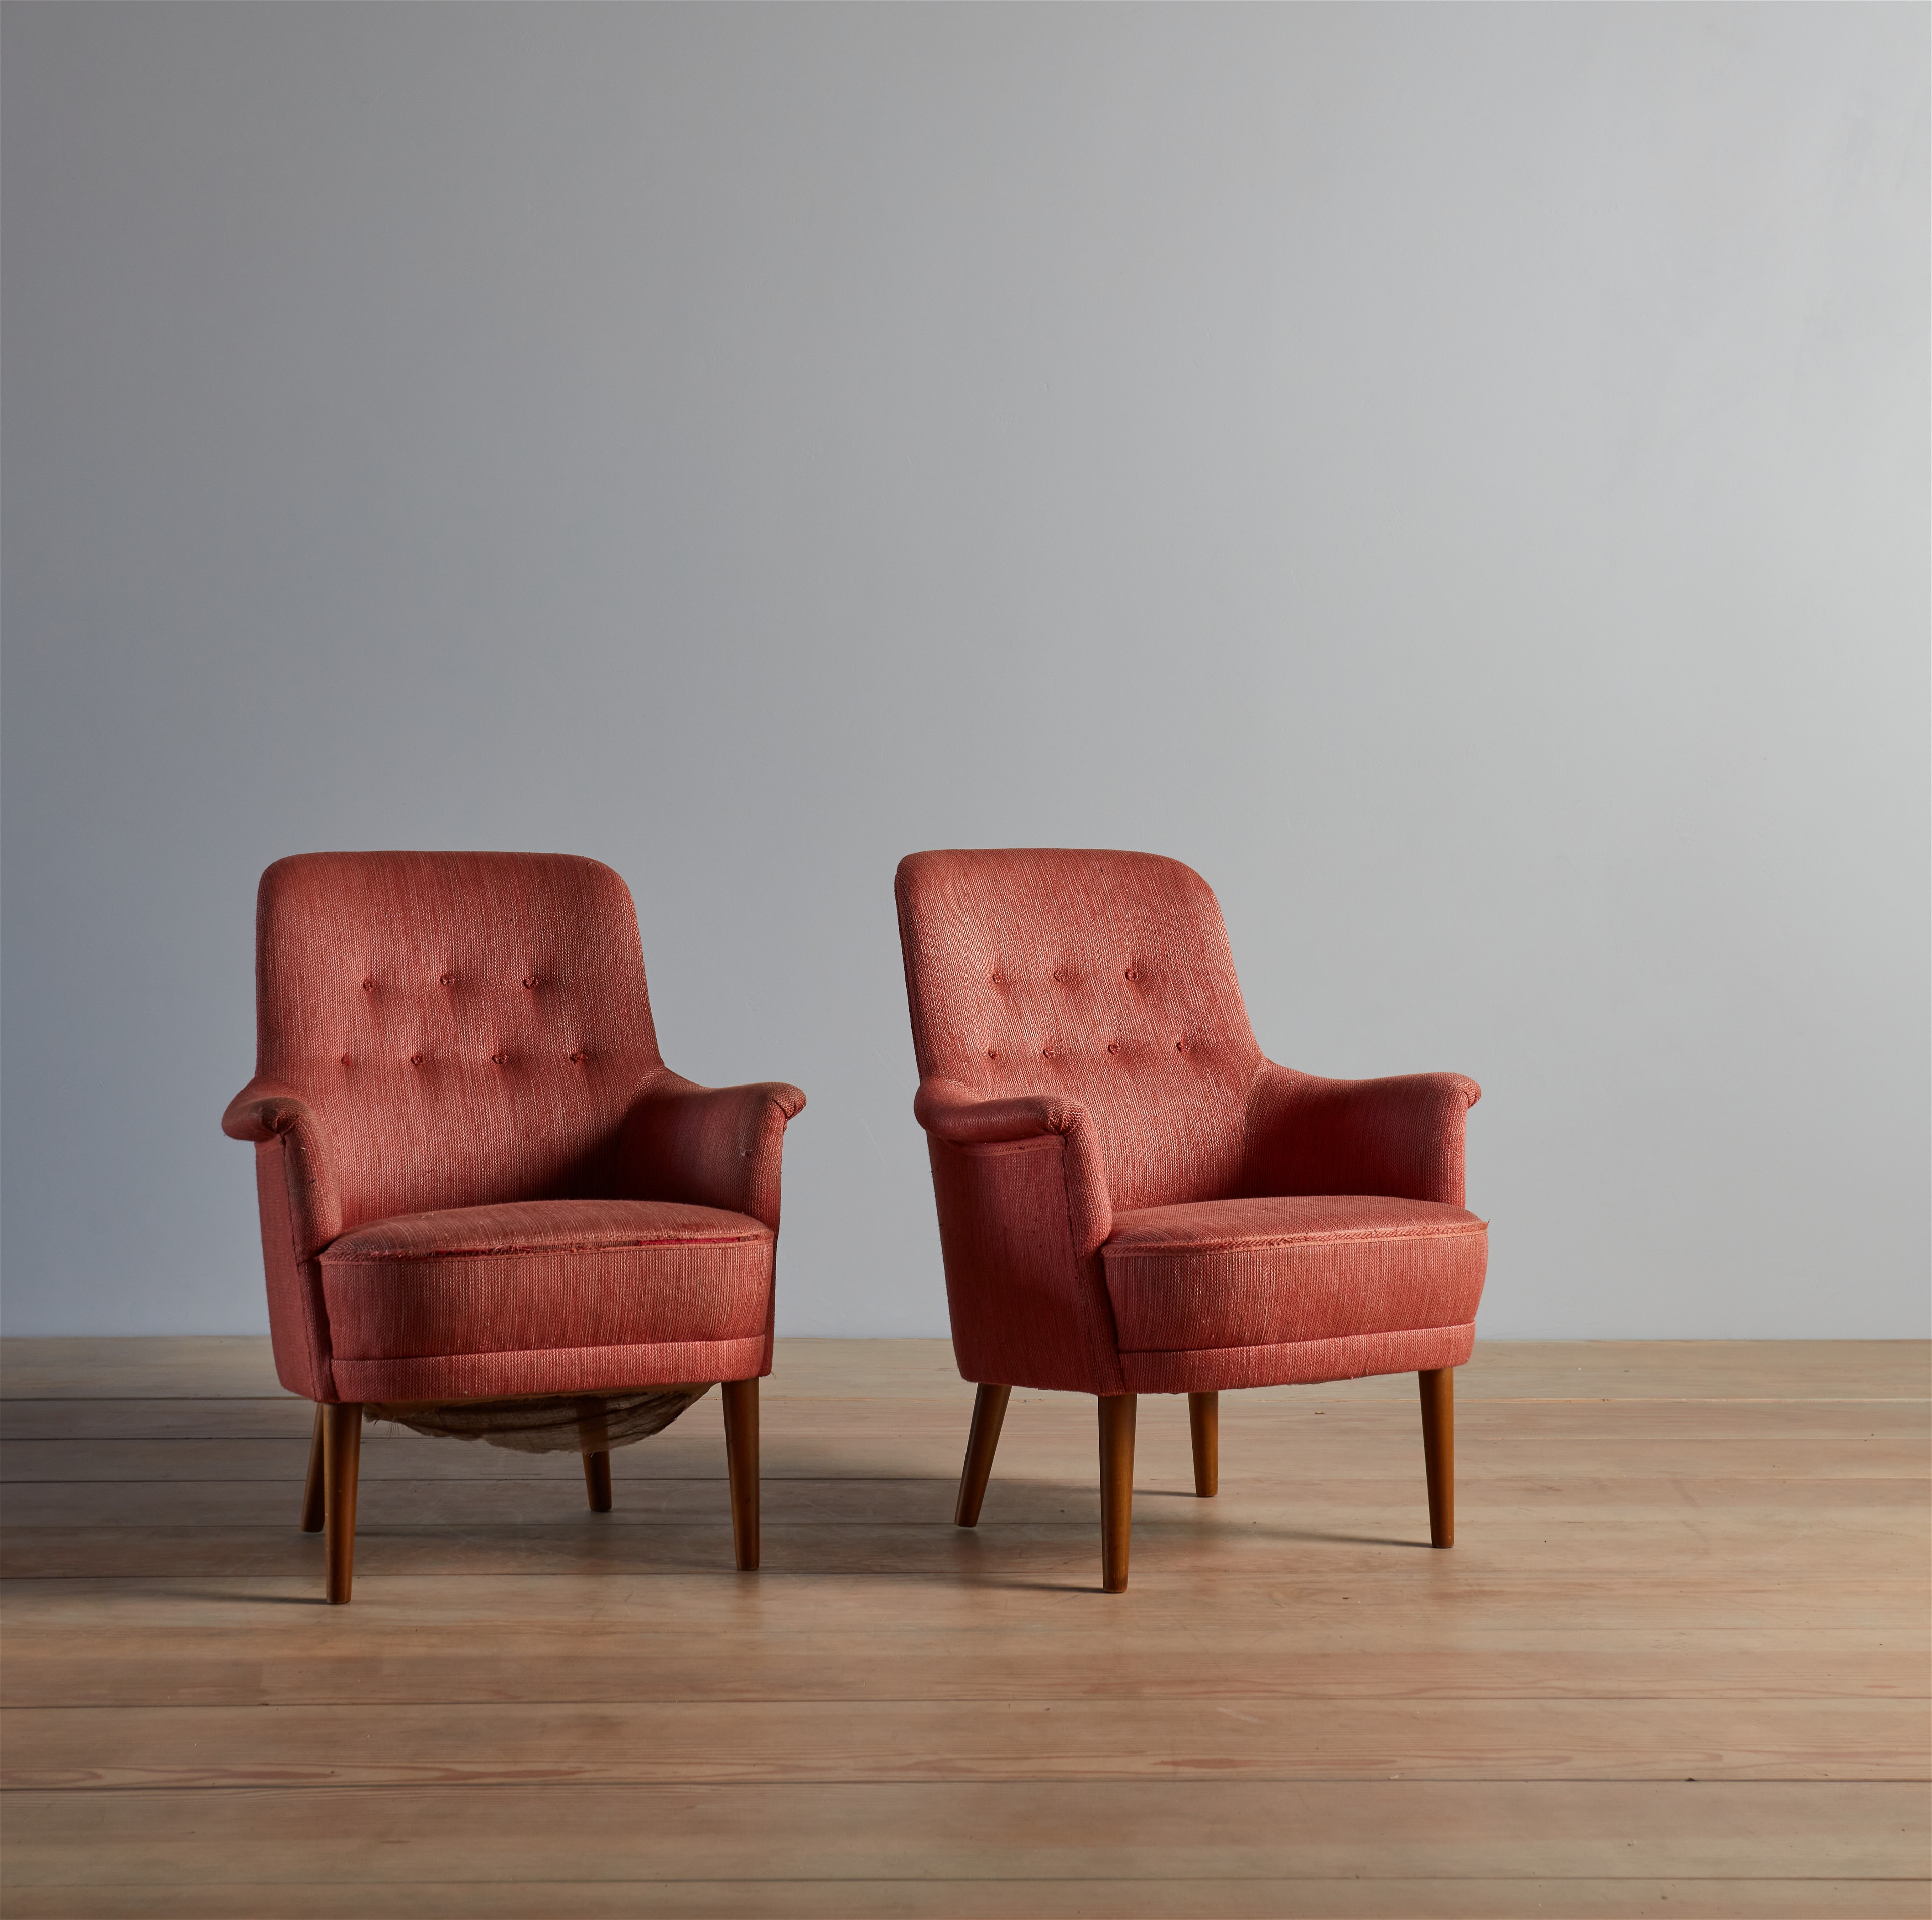 a pair of red chairs sitting on top of a wooden floor